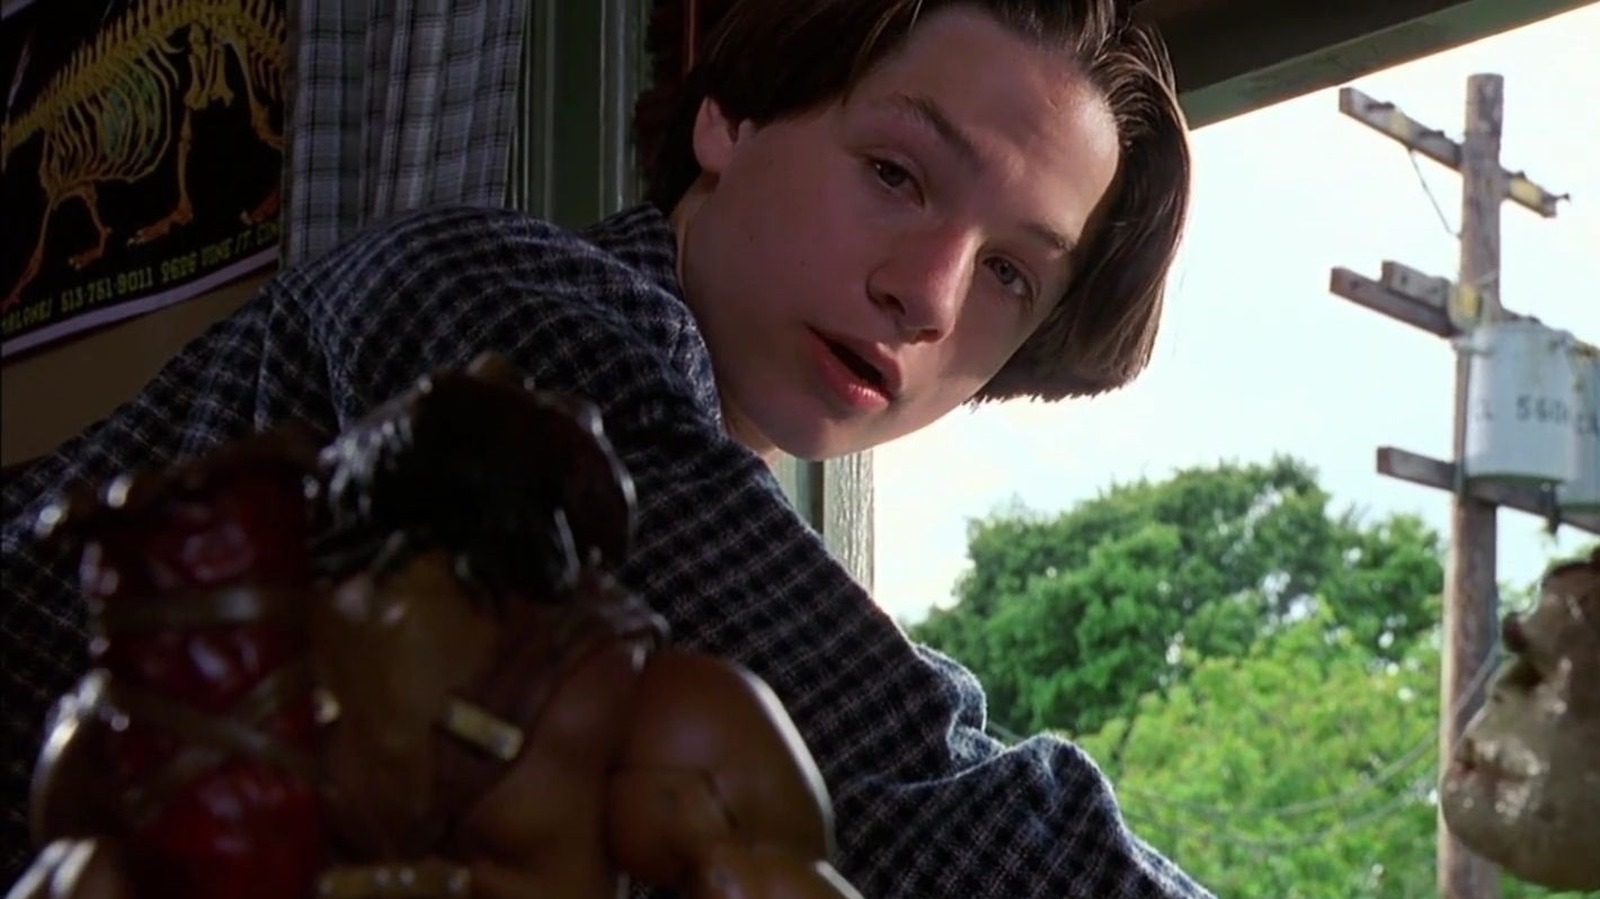 Whatever Happened To The Actor Who Played Alan Abernathy In Small Soldiers?